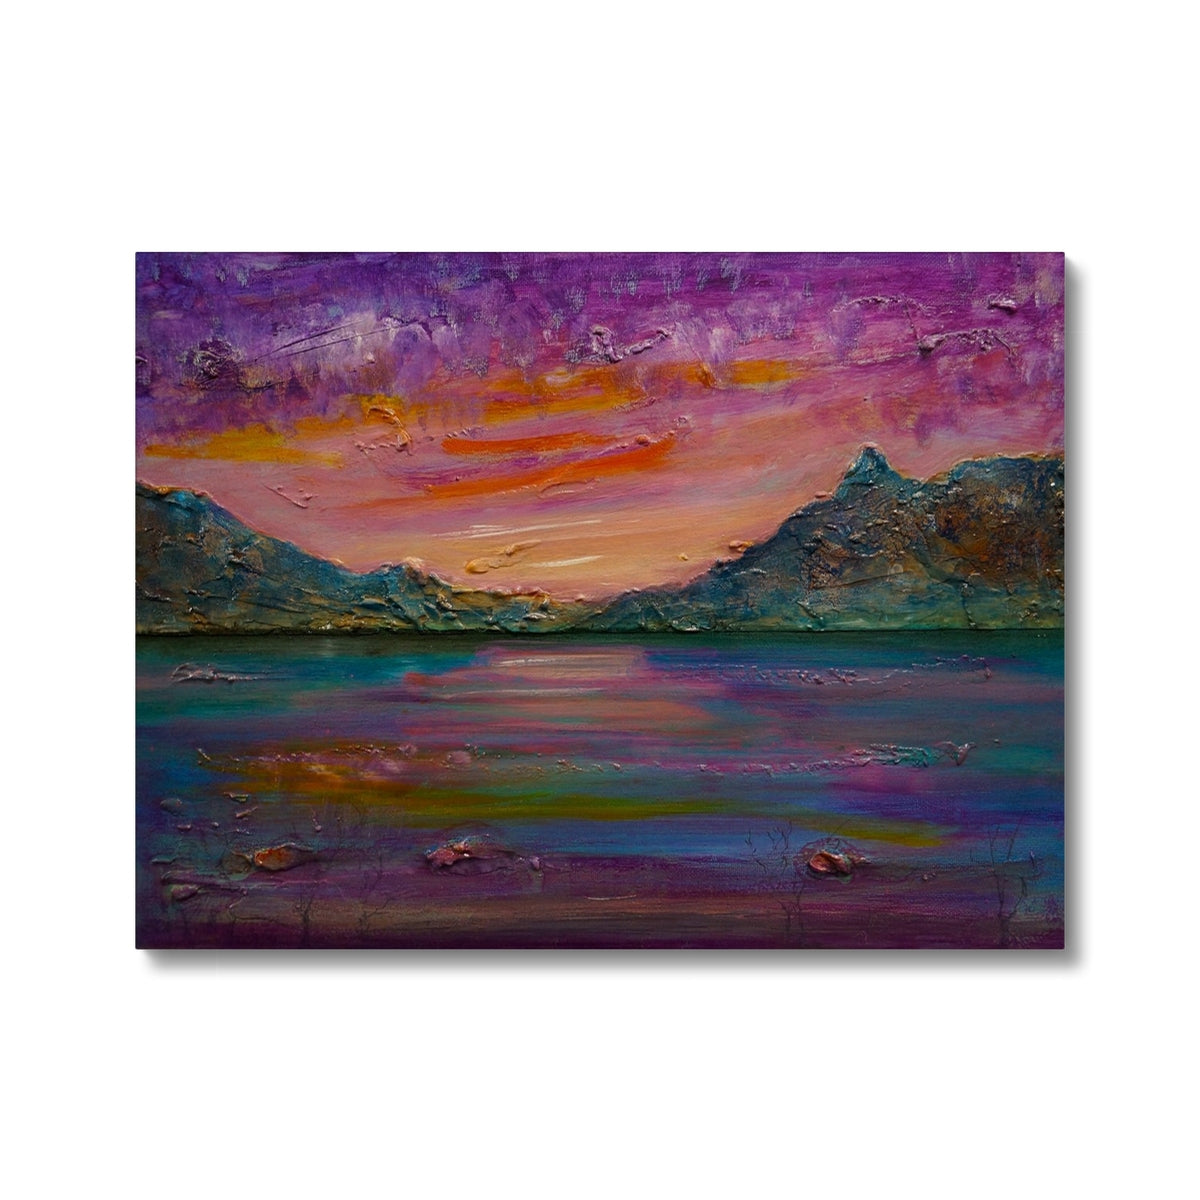 Loch Leven Sunset Painting | Canvas From Scotland-Contemporary Stretched Canvas Prints-Scottish Lochs & Mountains Art Gallery-24"x18"-Paintings, Prints, Homeware, Art Gifts From Scotland By Scottish Artist Kevin Hunter